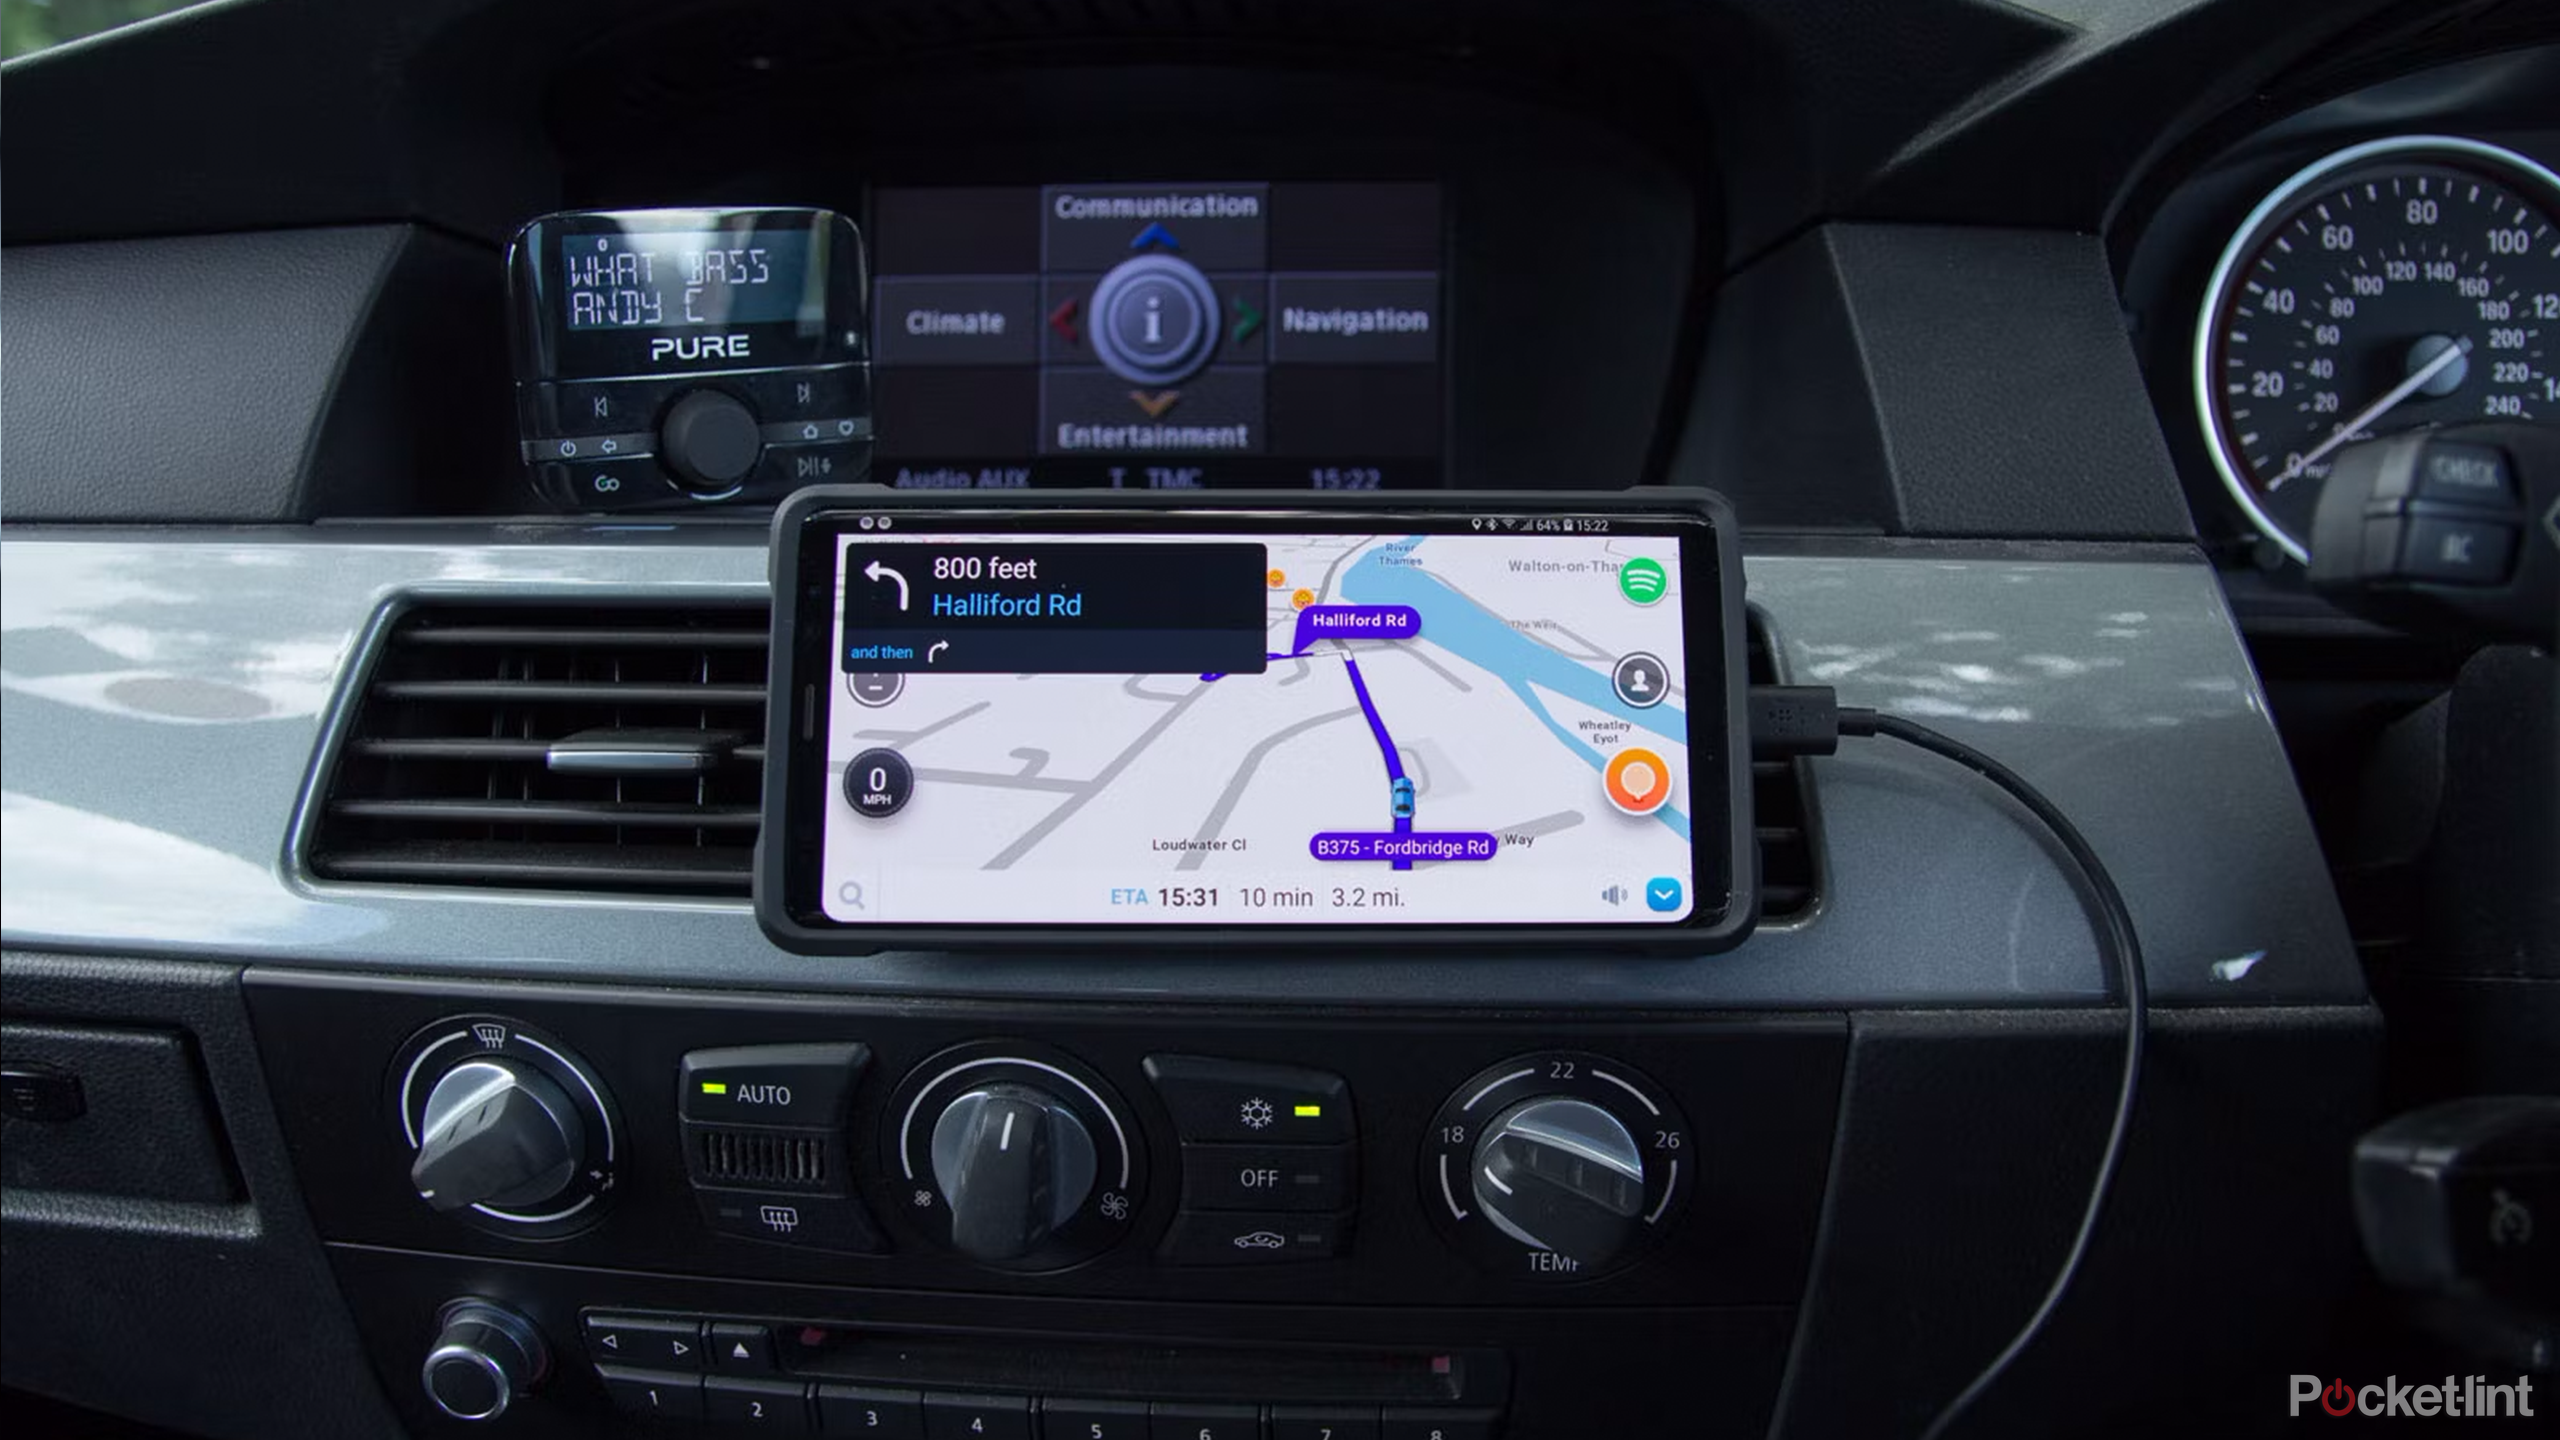 Use Waze on iPhone in the car